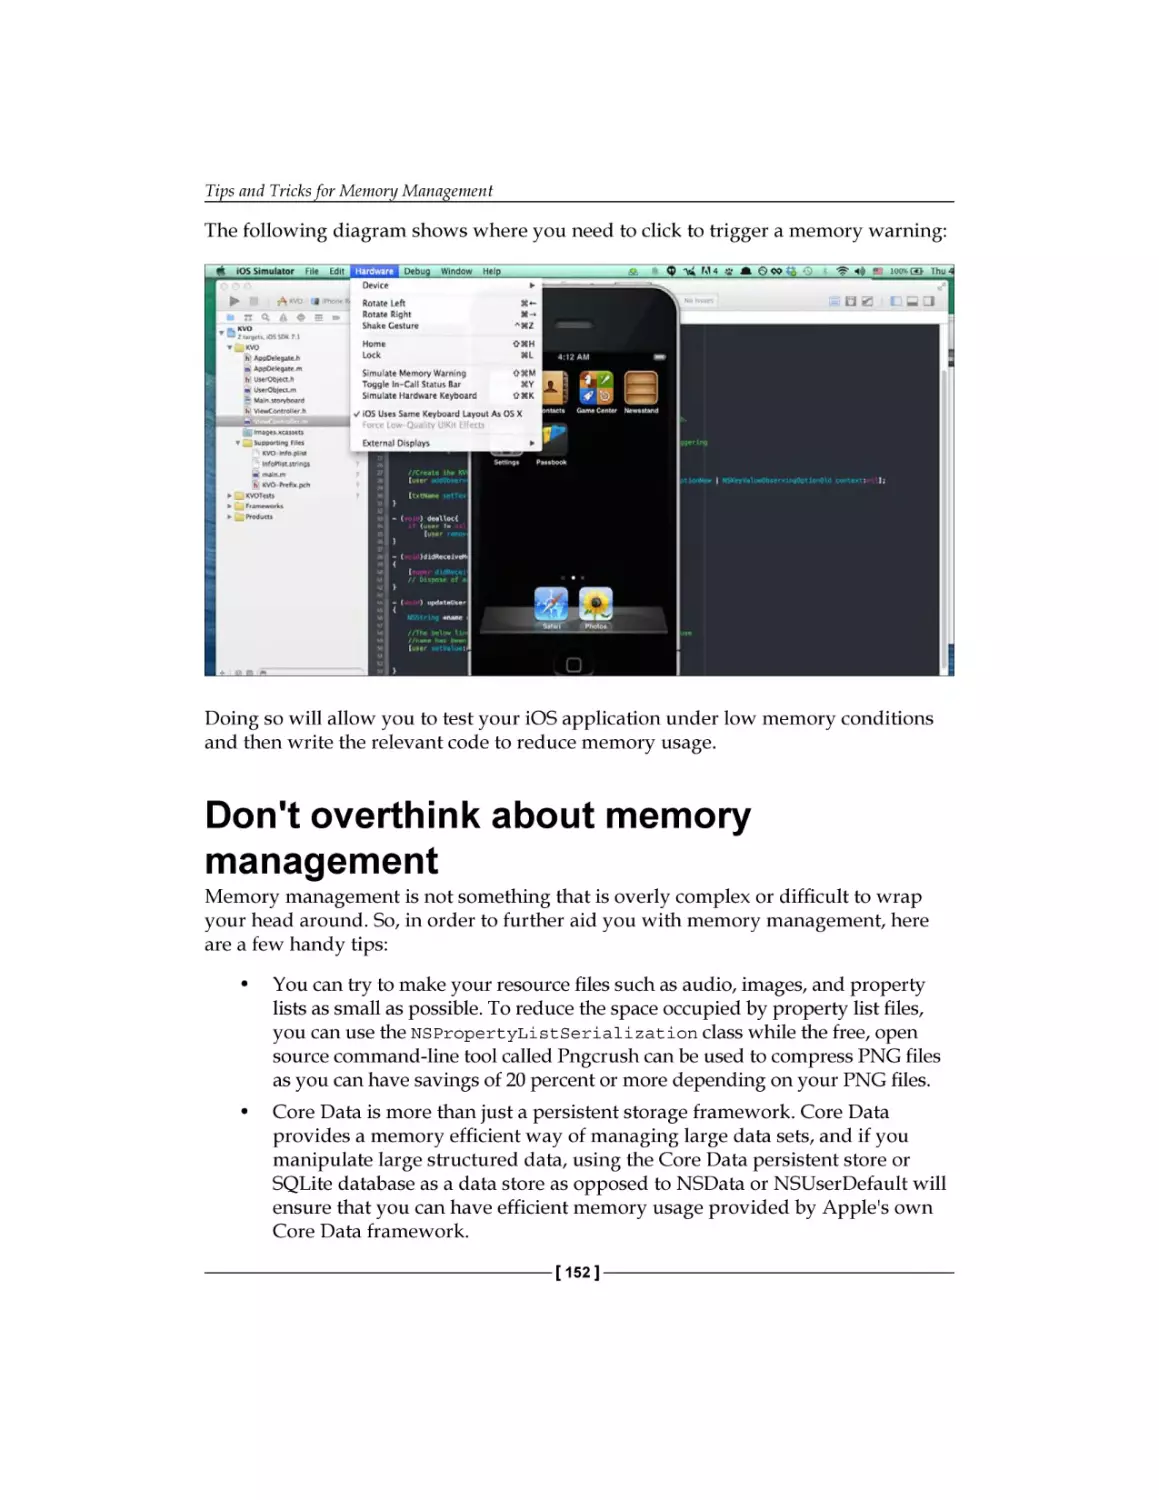 Don't overthink about memory management